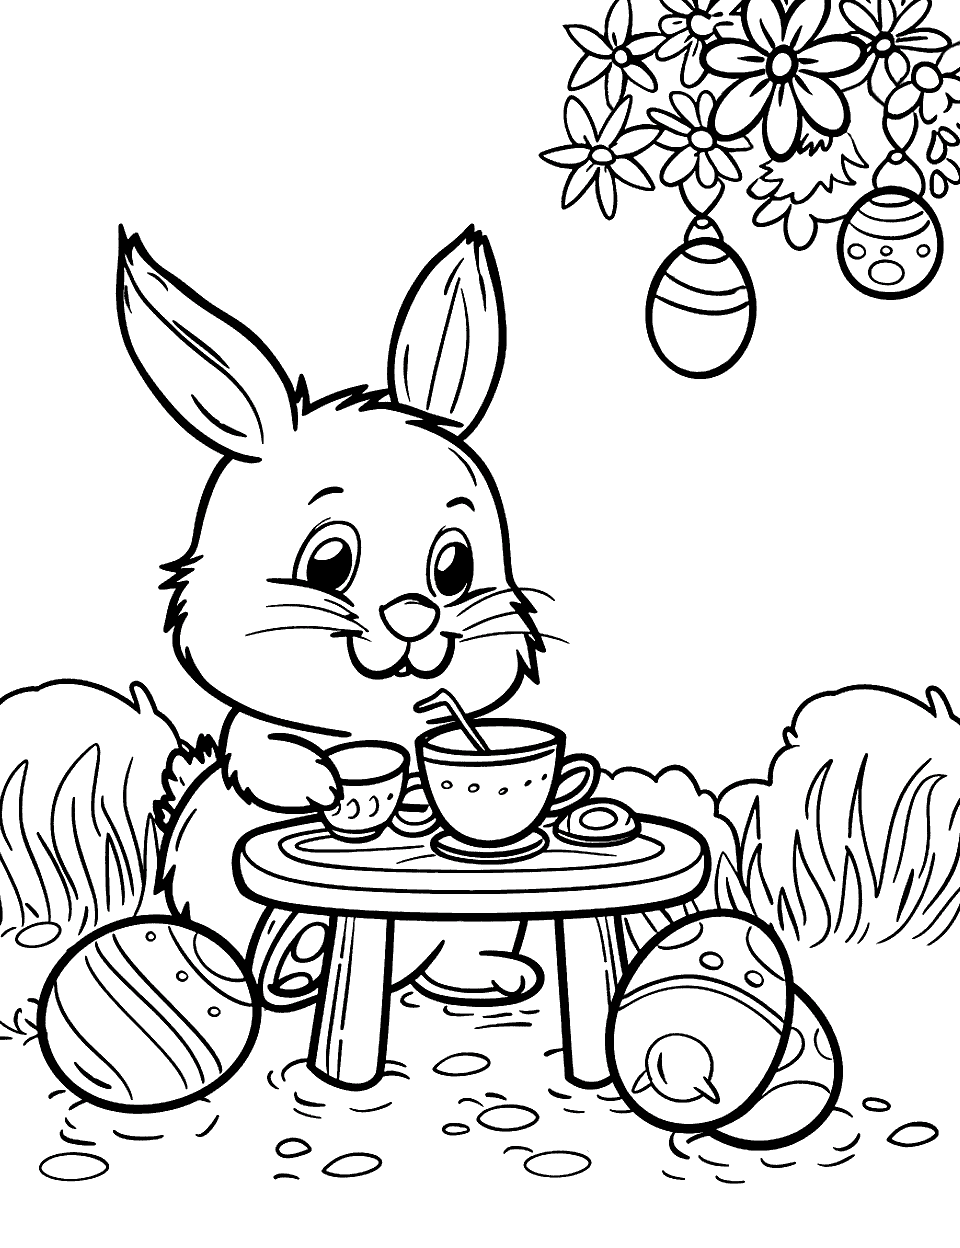 Garden Tea Party Easter Bunny Coloring Page - A bunny sitting at a small table set for tea, with a few Easter eggs placed around the table as decorations.